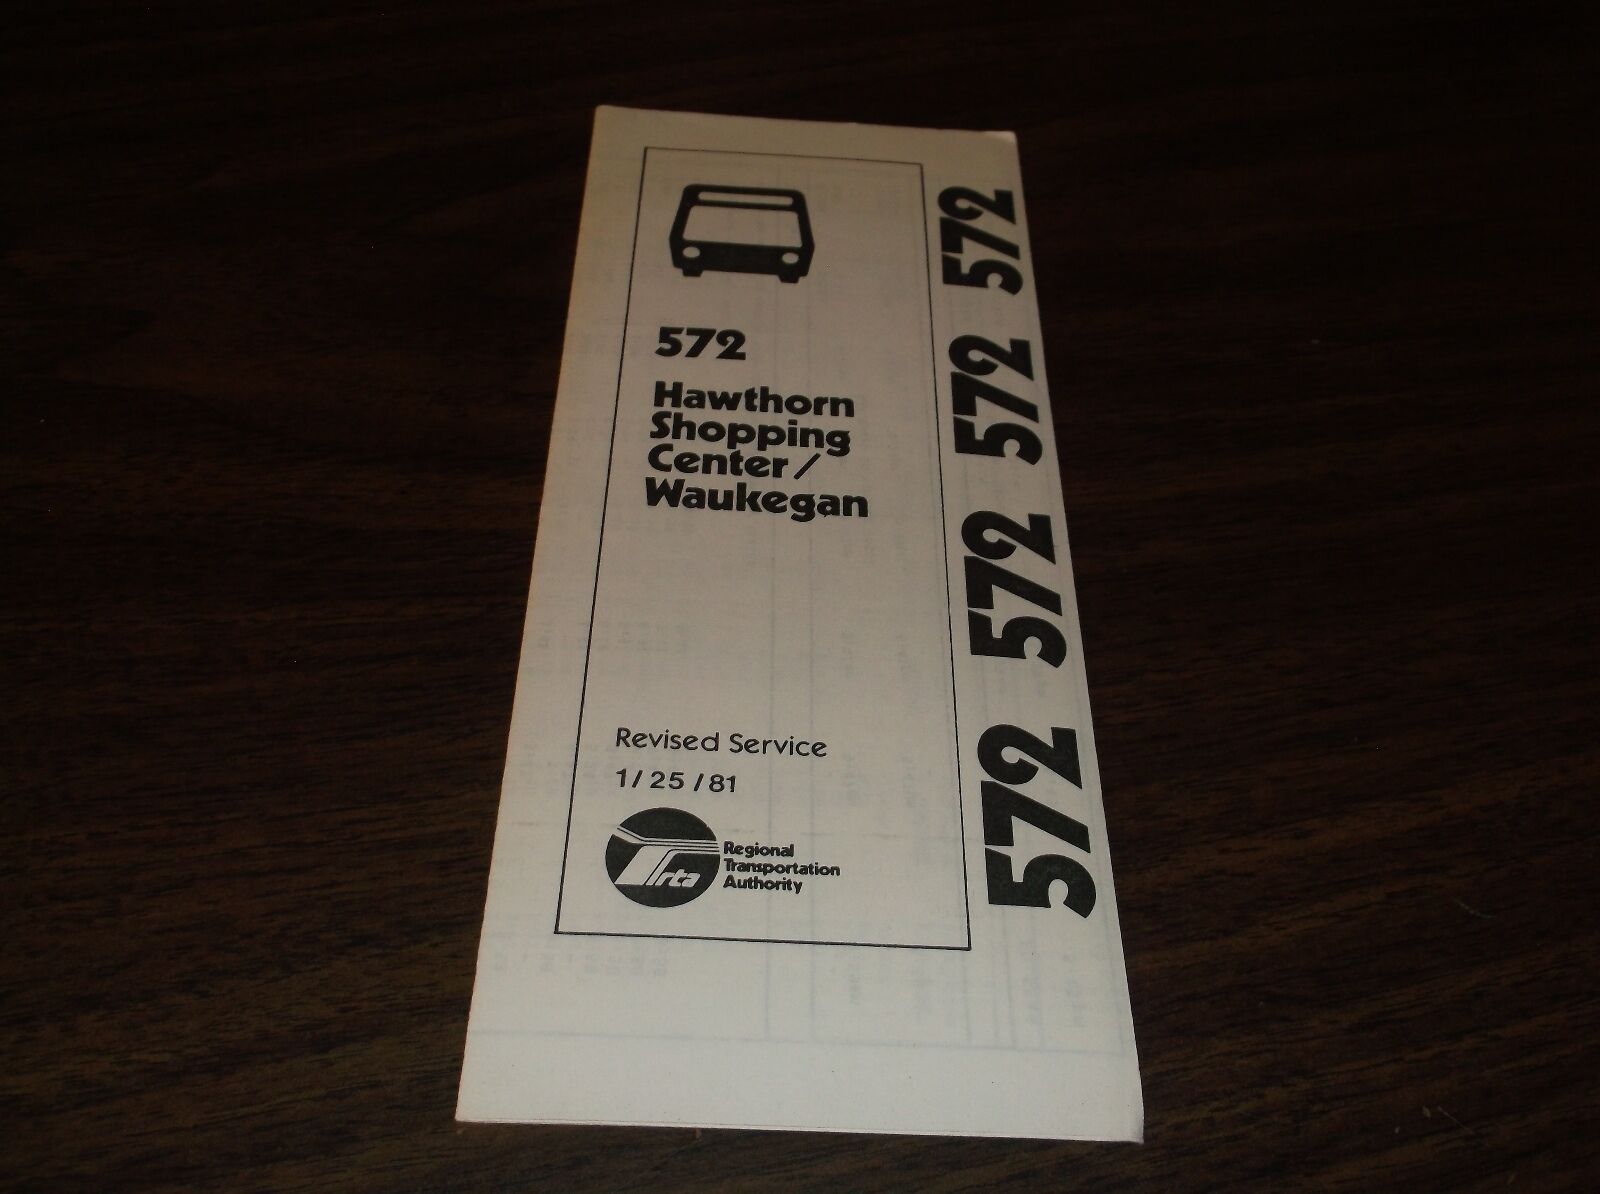 JANUARY 1981 CHICAGO RTA ROUTE 572 HAWTHORN SHOPPING WAUKEGAN BUS SCHEDULE